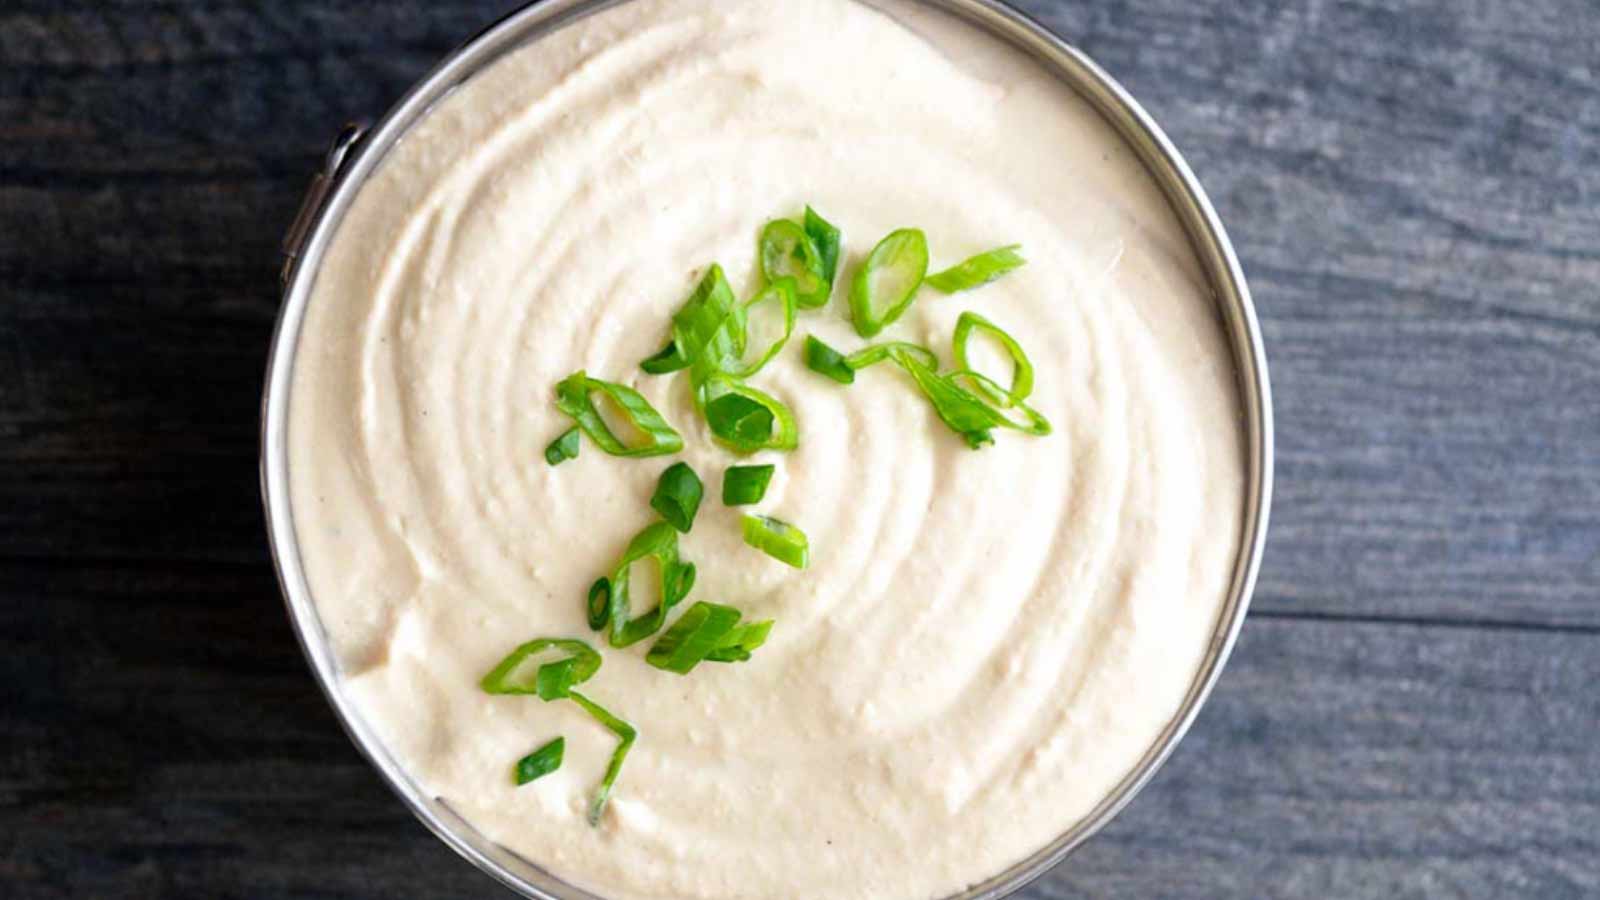 12 Party Dip Recipes For New Year’s Eve